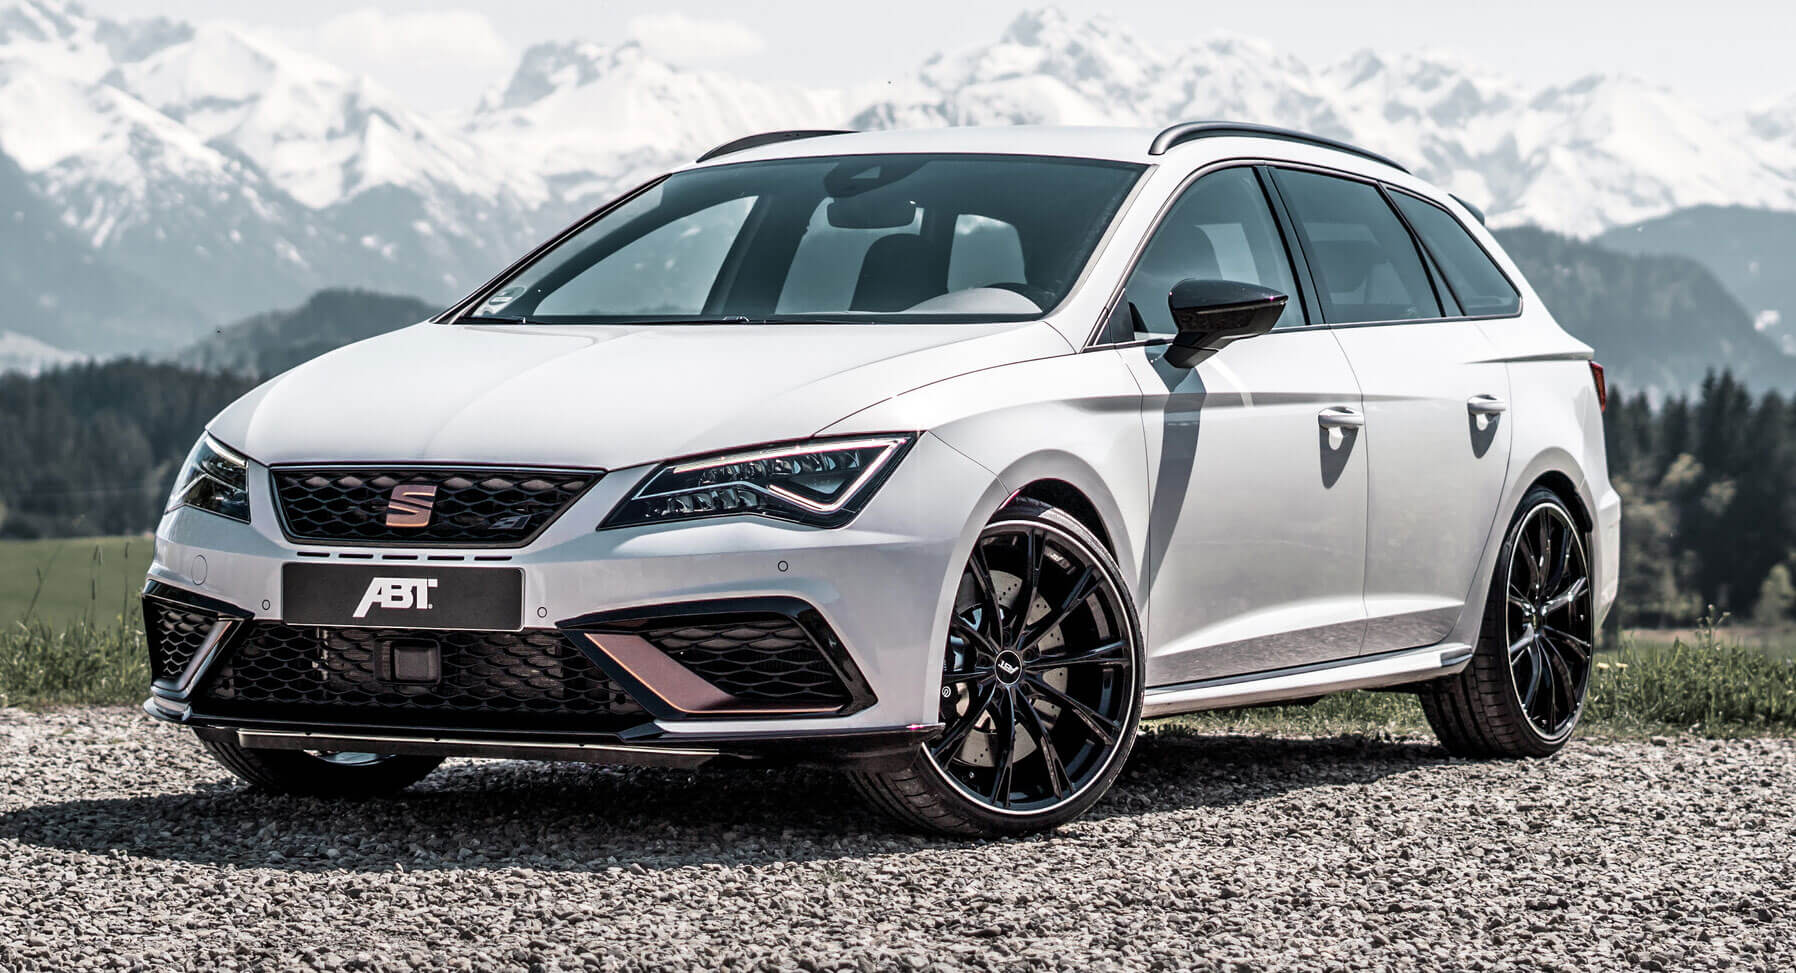 The new Seat Leon Cupra R is here